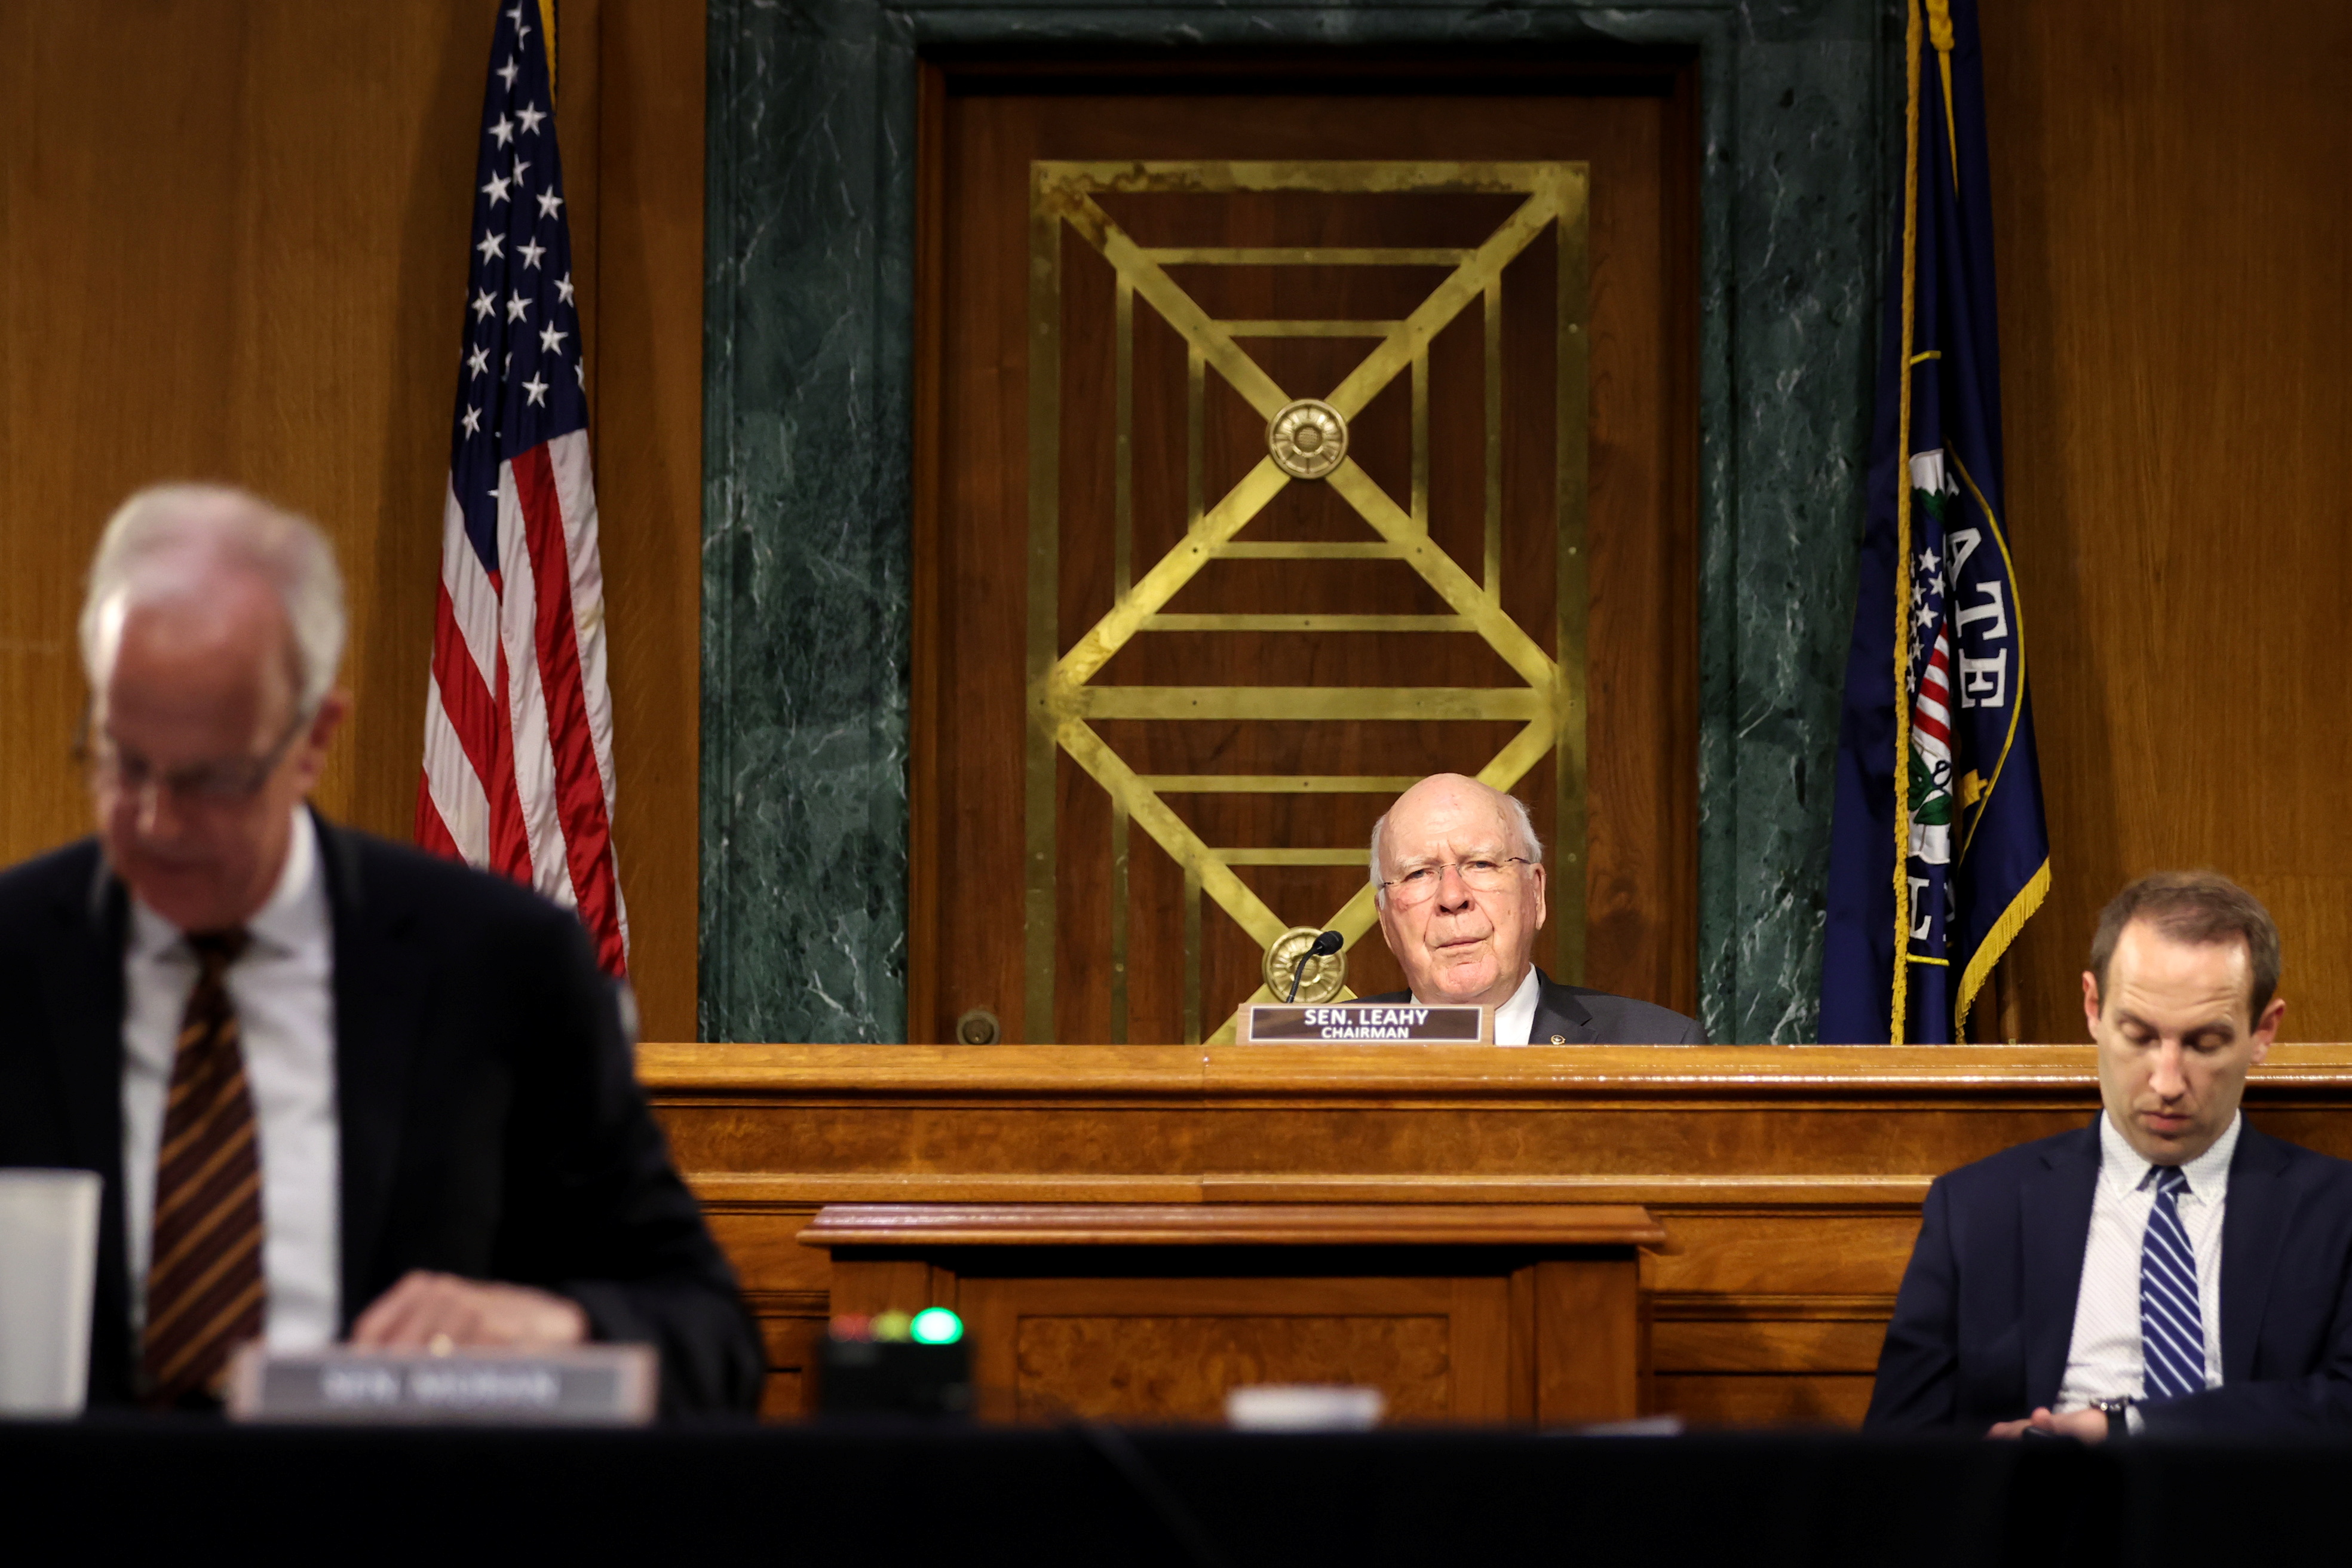 Committee Chairman Leahy presides as Secretary of State Blinken testifies about the State Department budget before the Senate Appropriations Committee on Capitol Hill in Washington